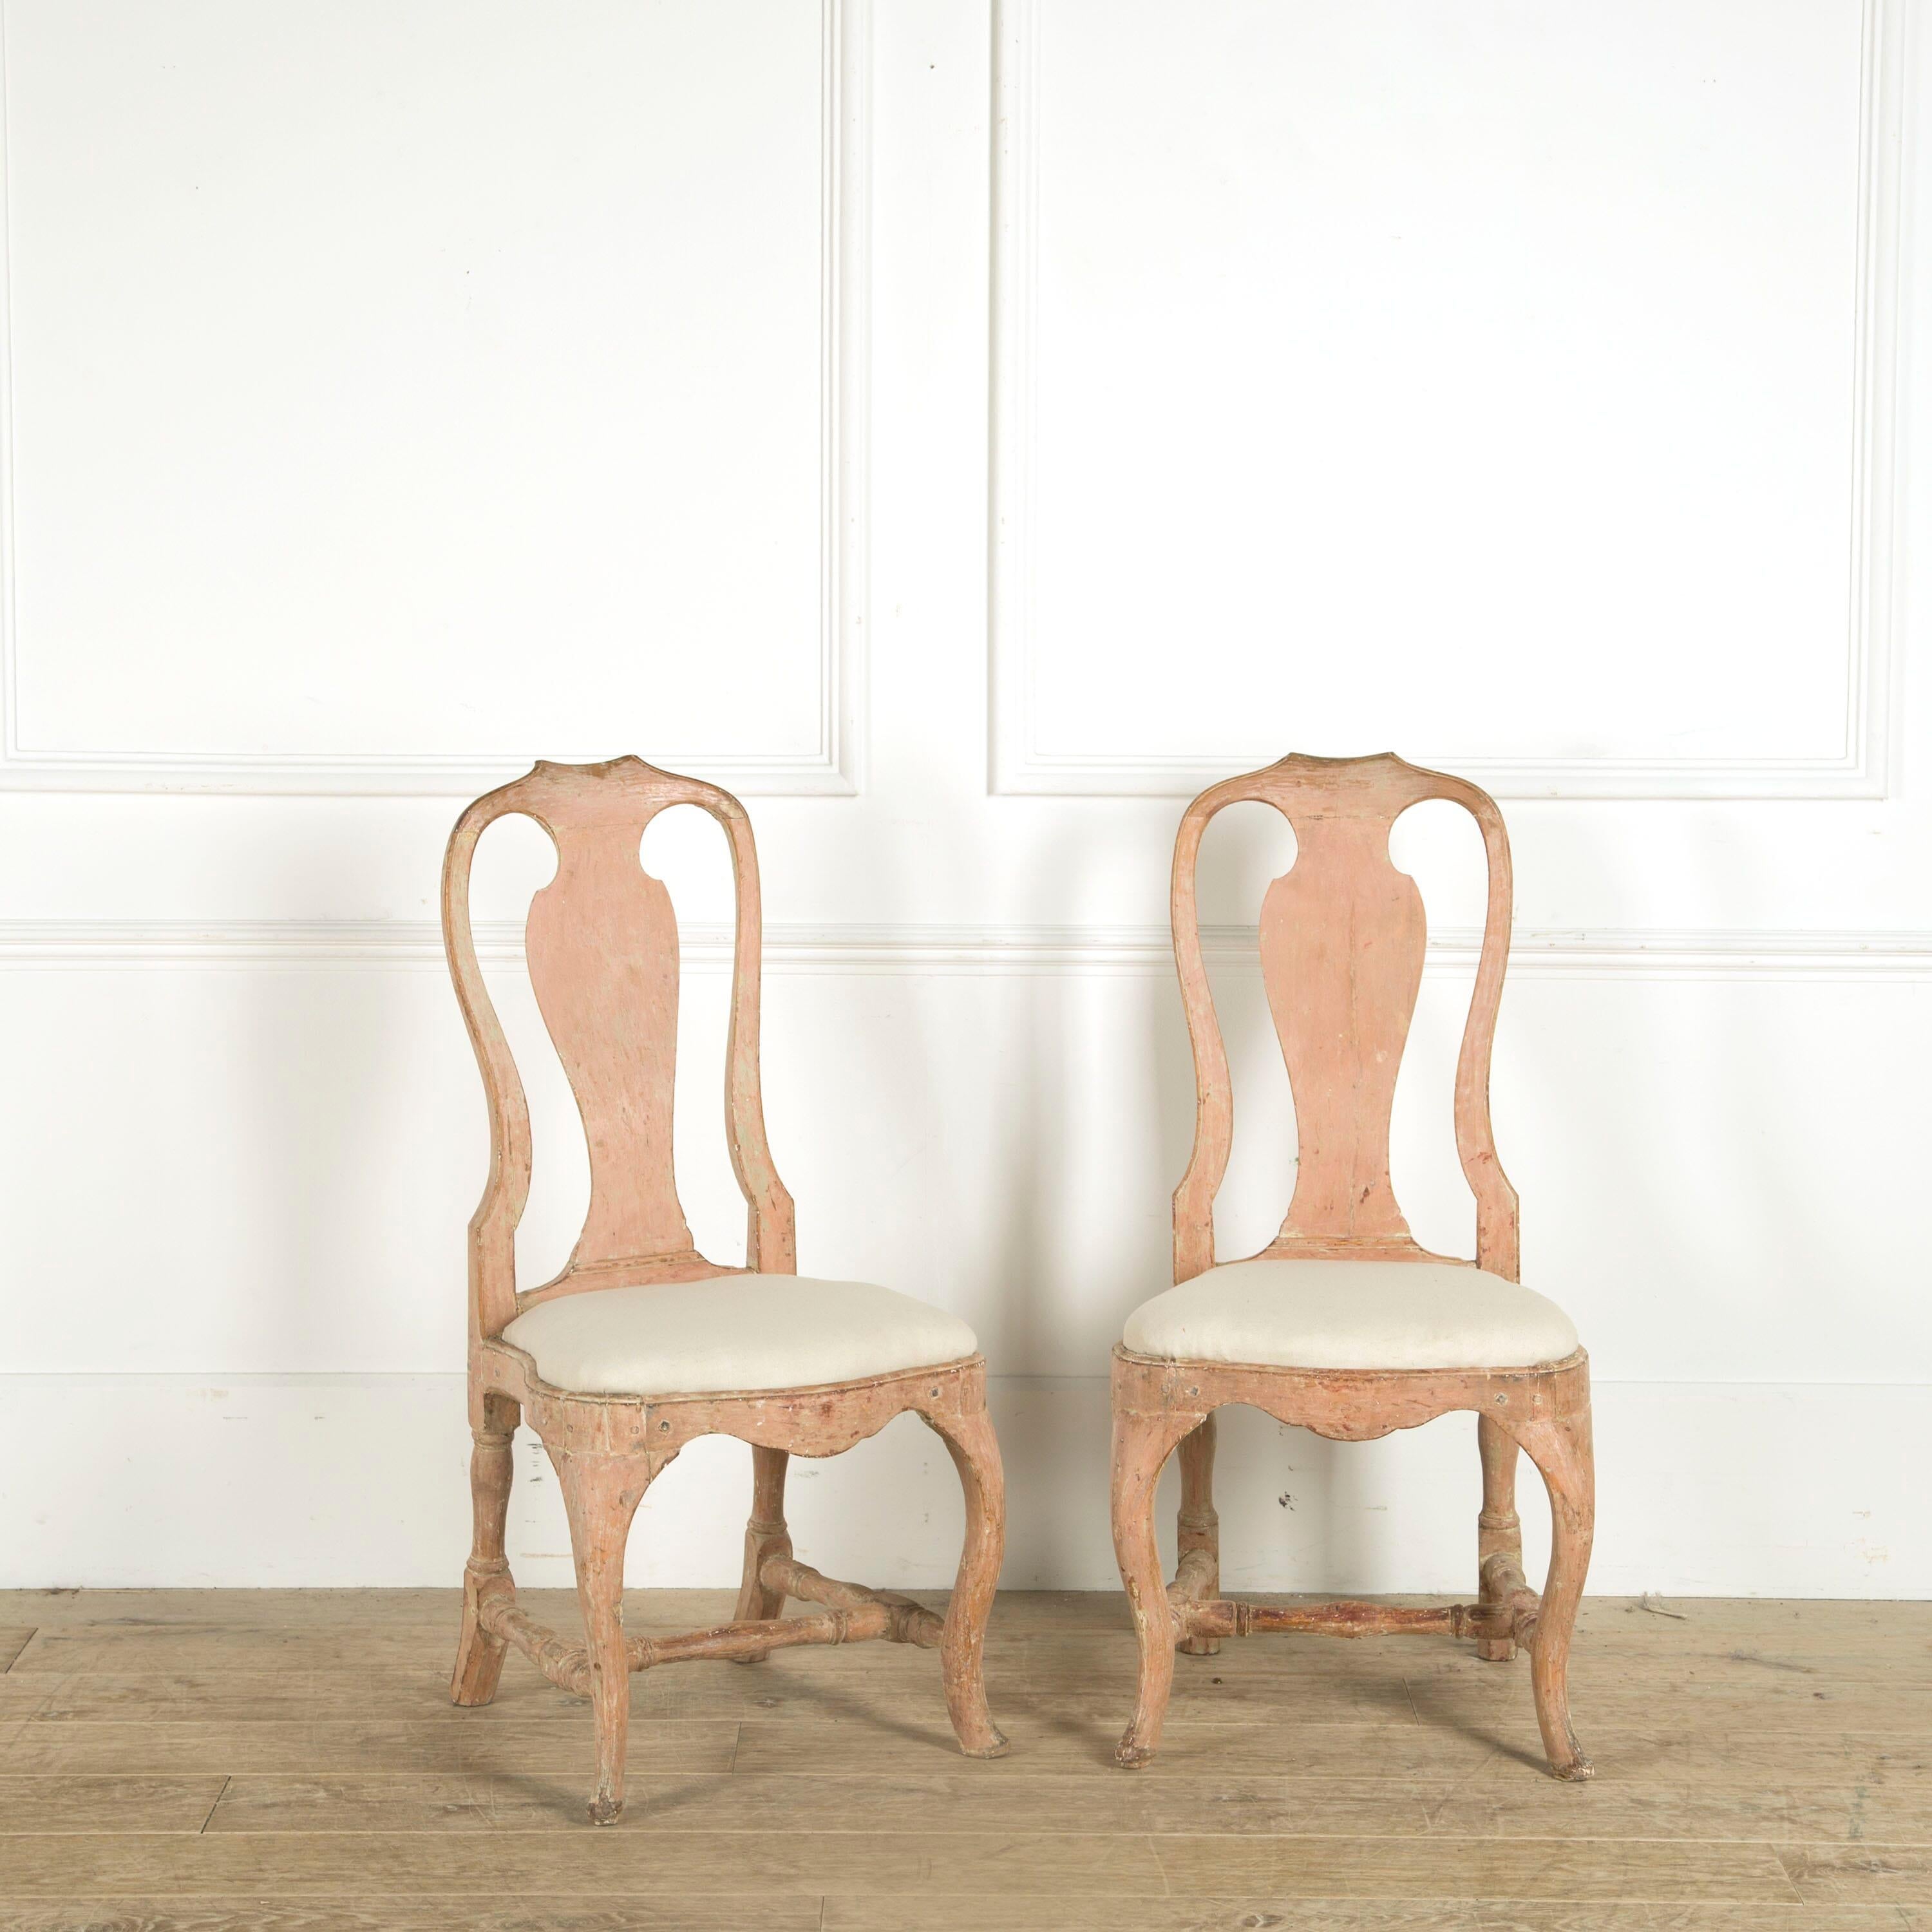 Pair of Rococo chairs manufactured by the early chair maker Peter Ã–sterman (1719-1776) handmade in his workshop in SÃ¶dermalm in Stockholm. Scraped to its exceptionally and unusual color. One seat original and one made in the end of the 19th